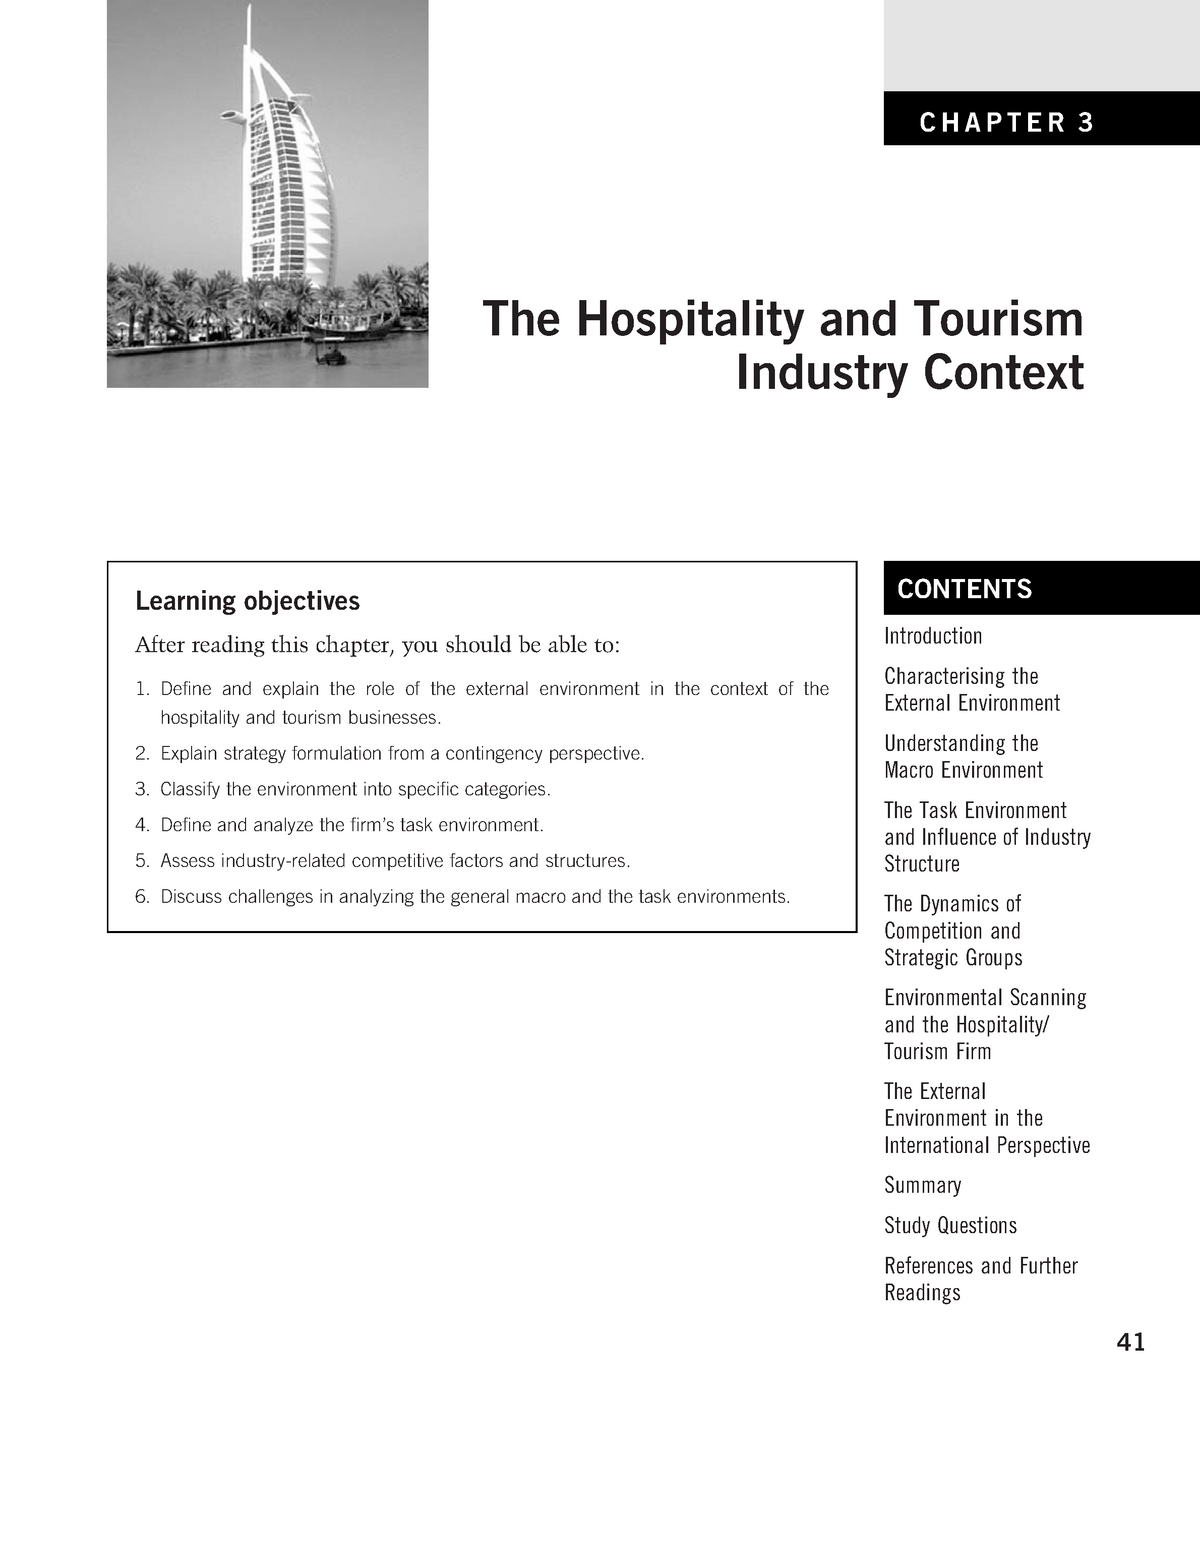 dissertation topics for tourism and hospitality